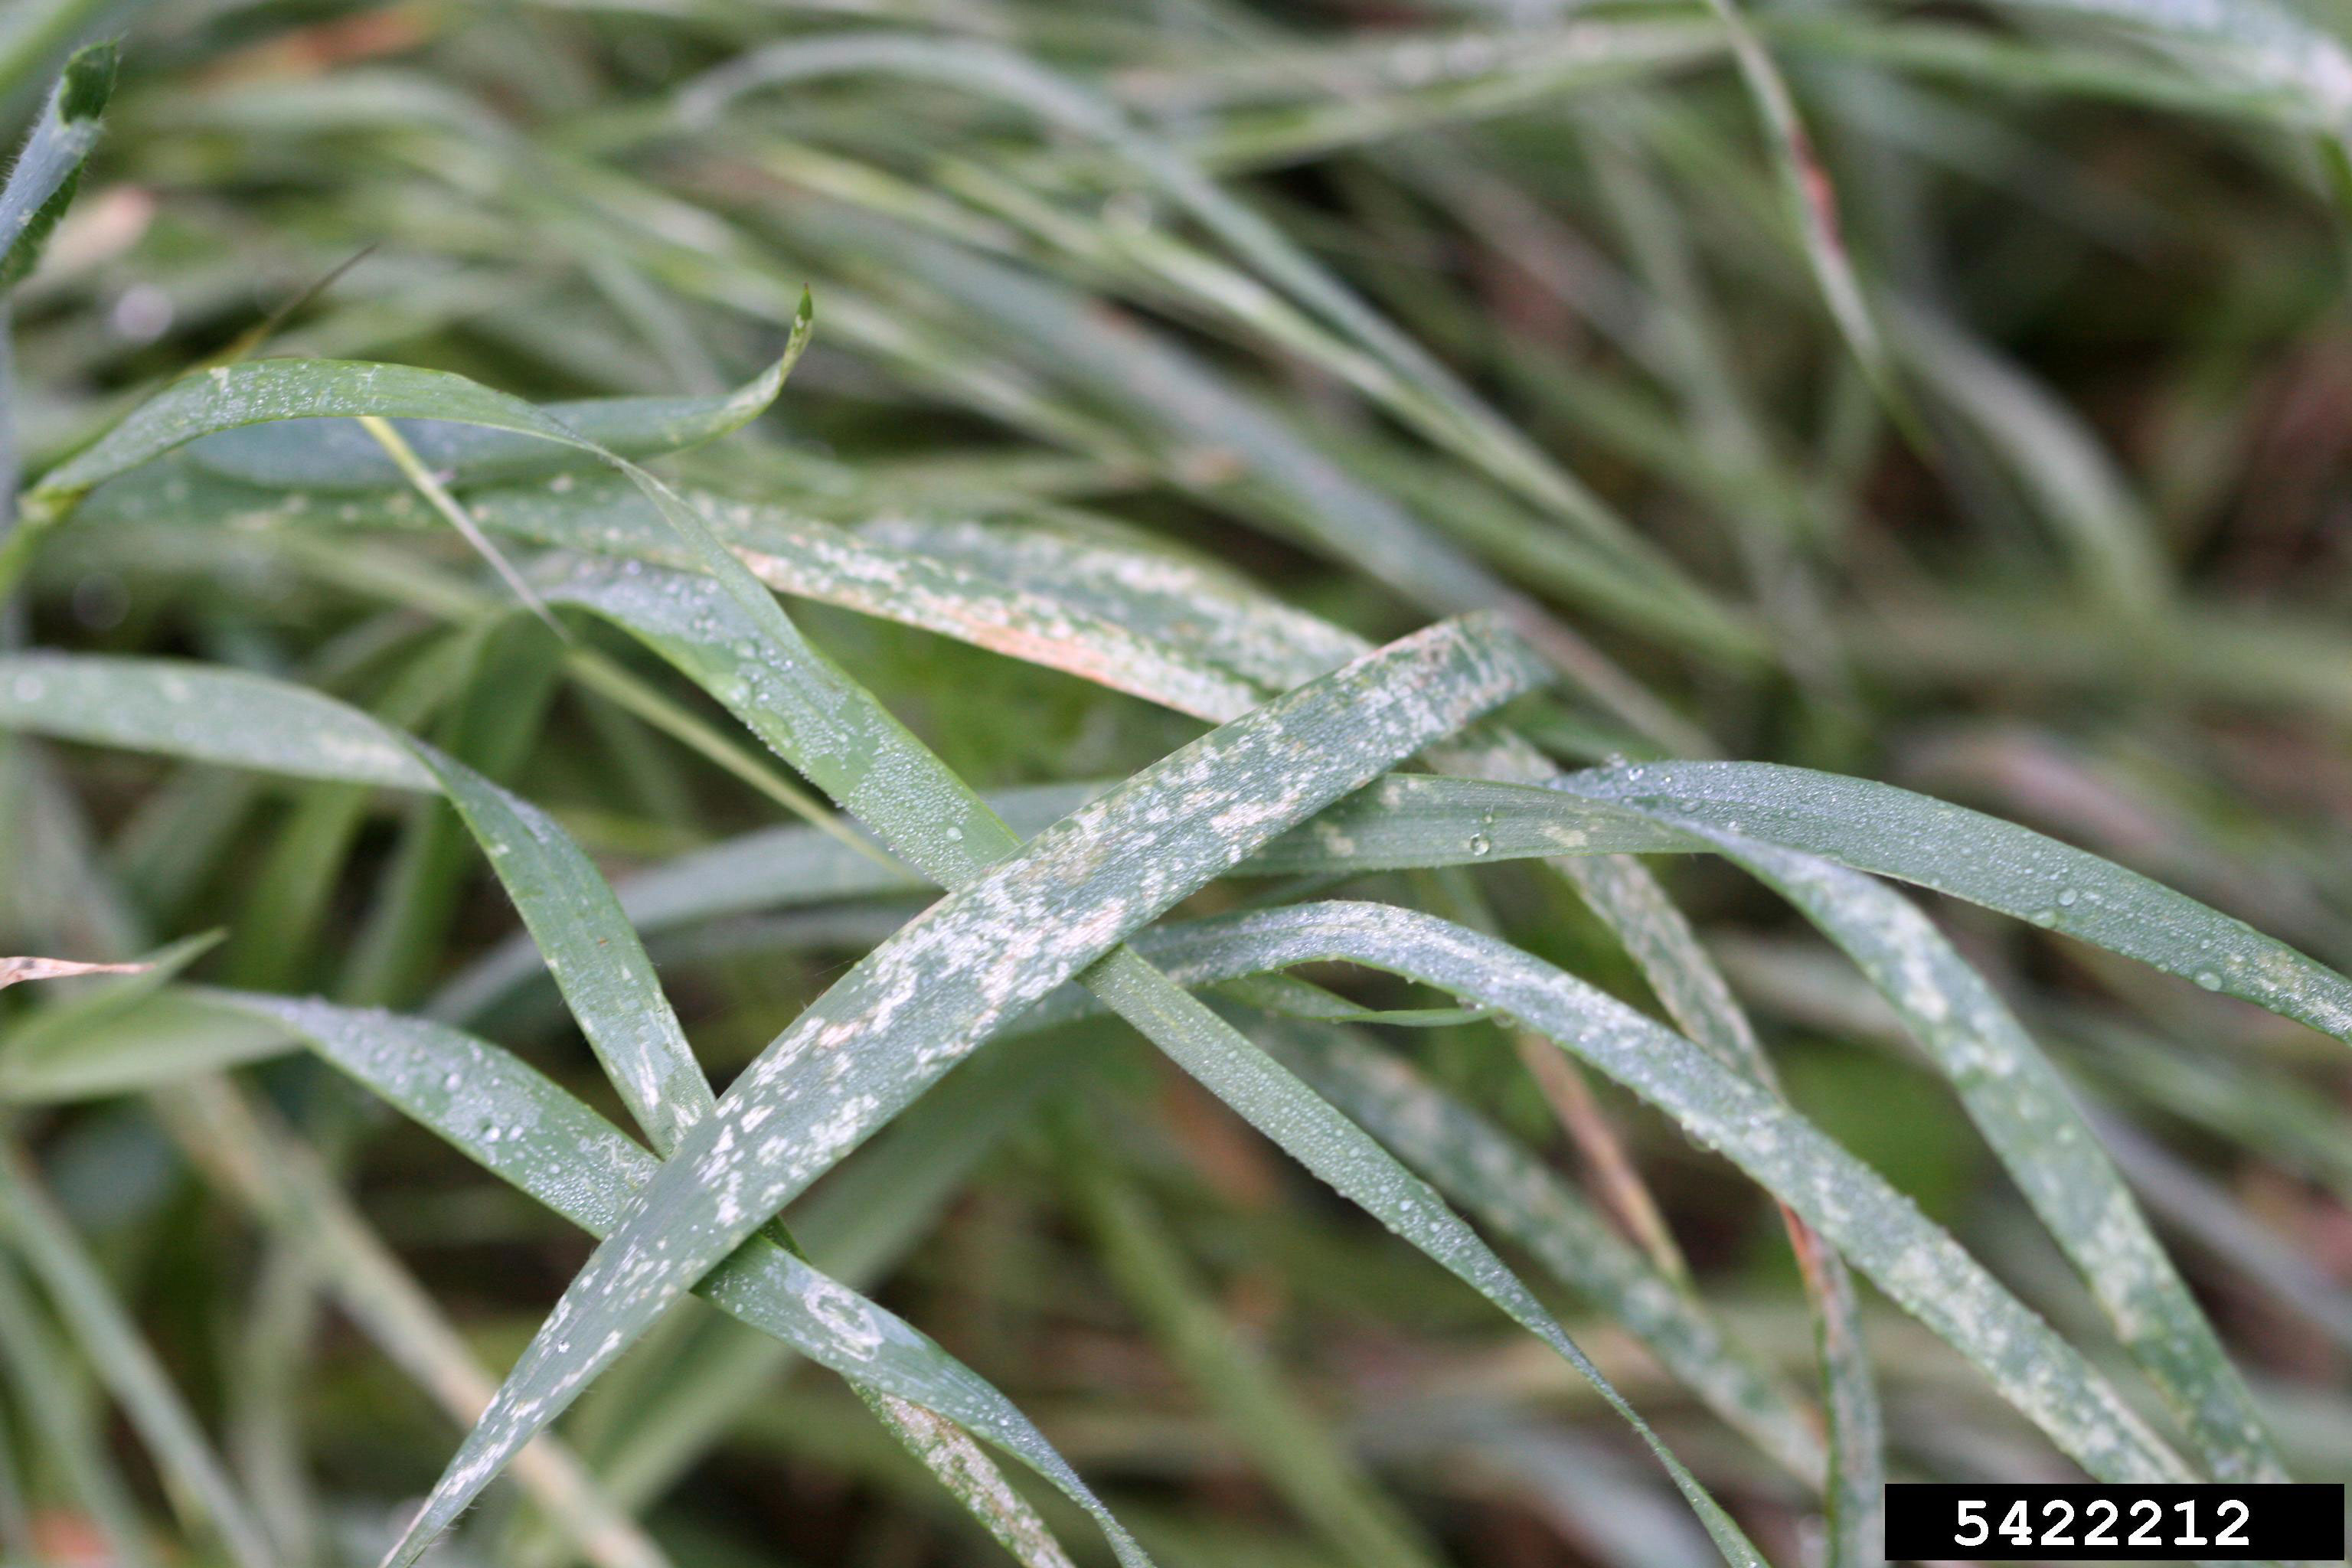 : Green grass with multiple brownish-white spots on the leaves.